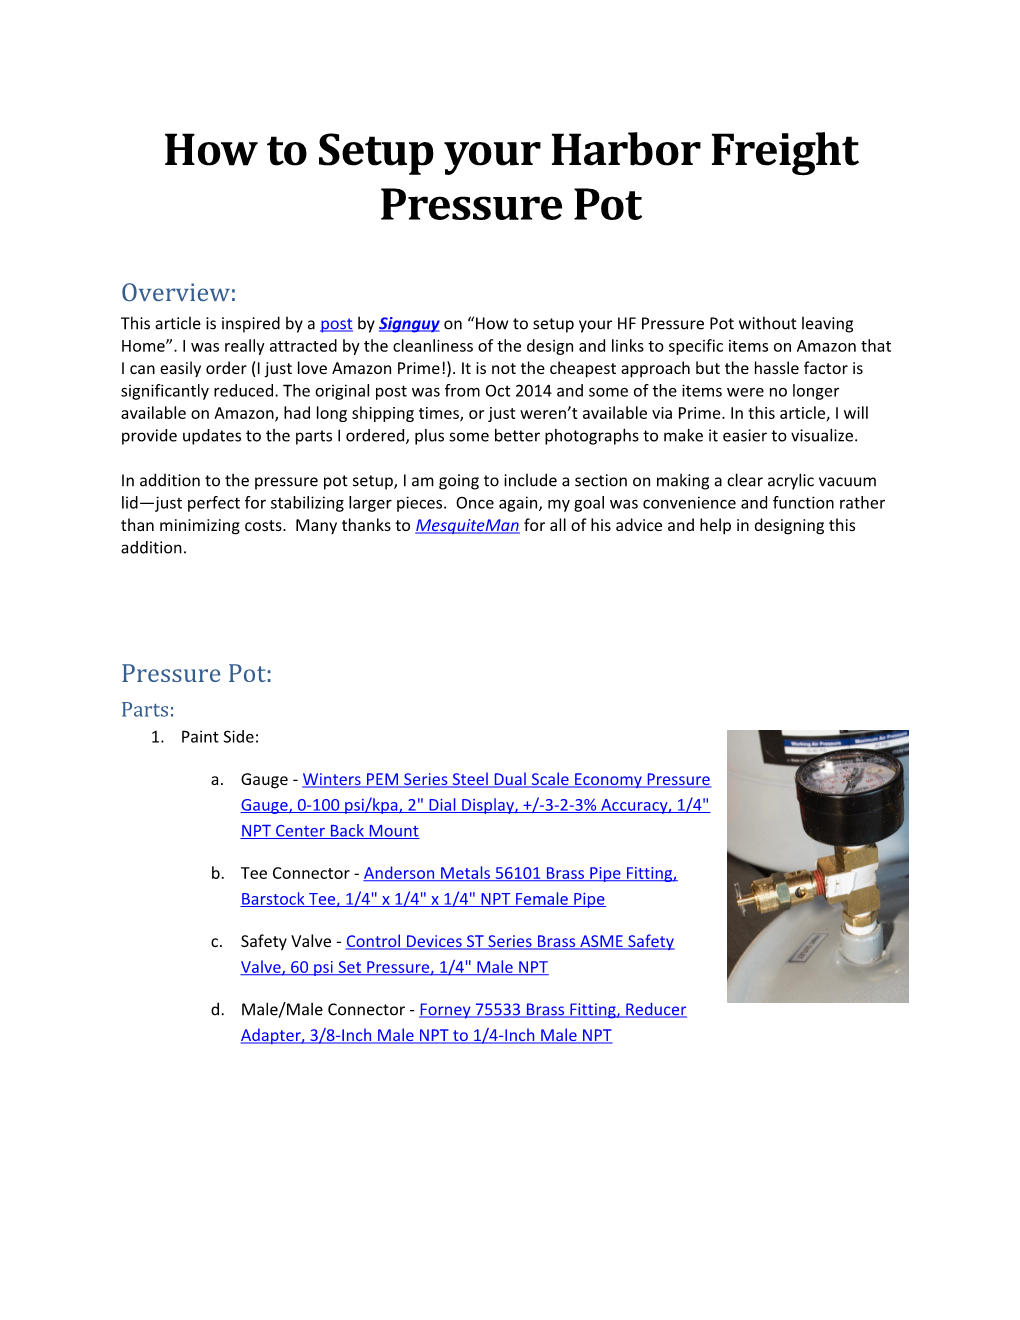 How to Setup Your Harbor Freight Pressure Pot